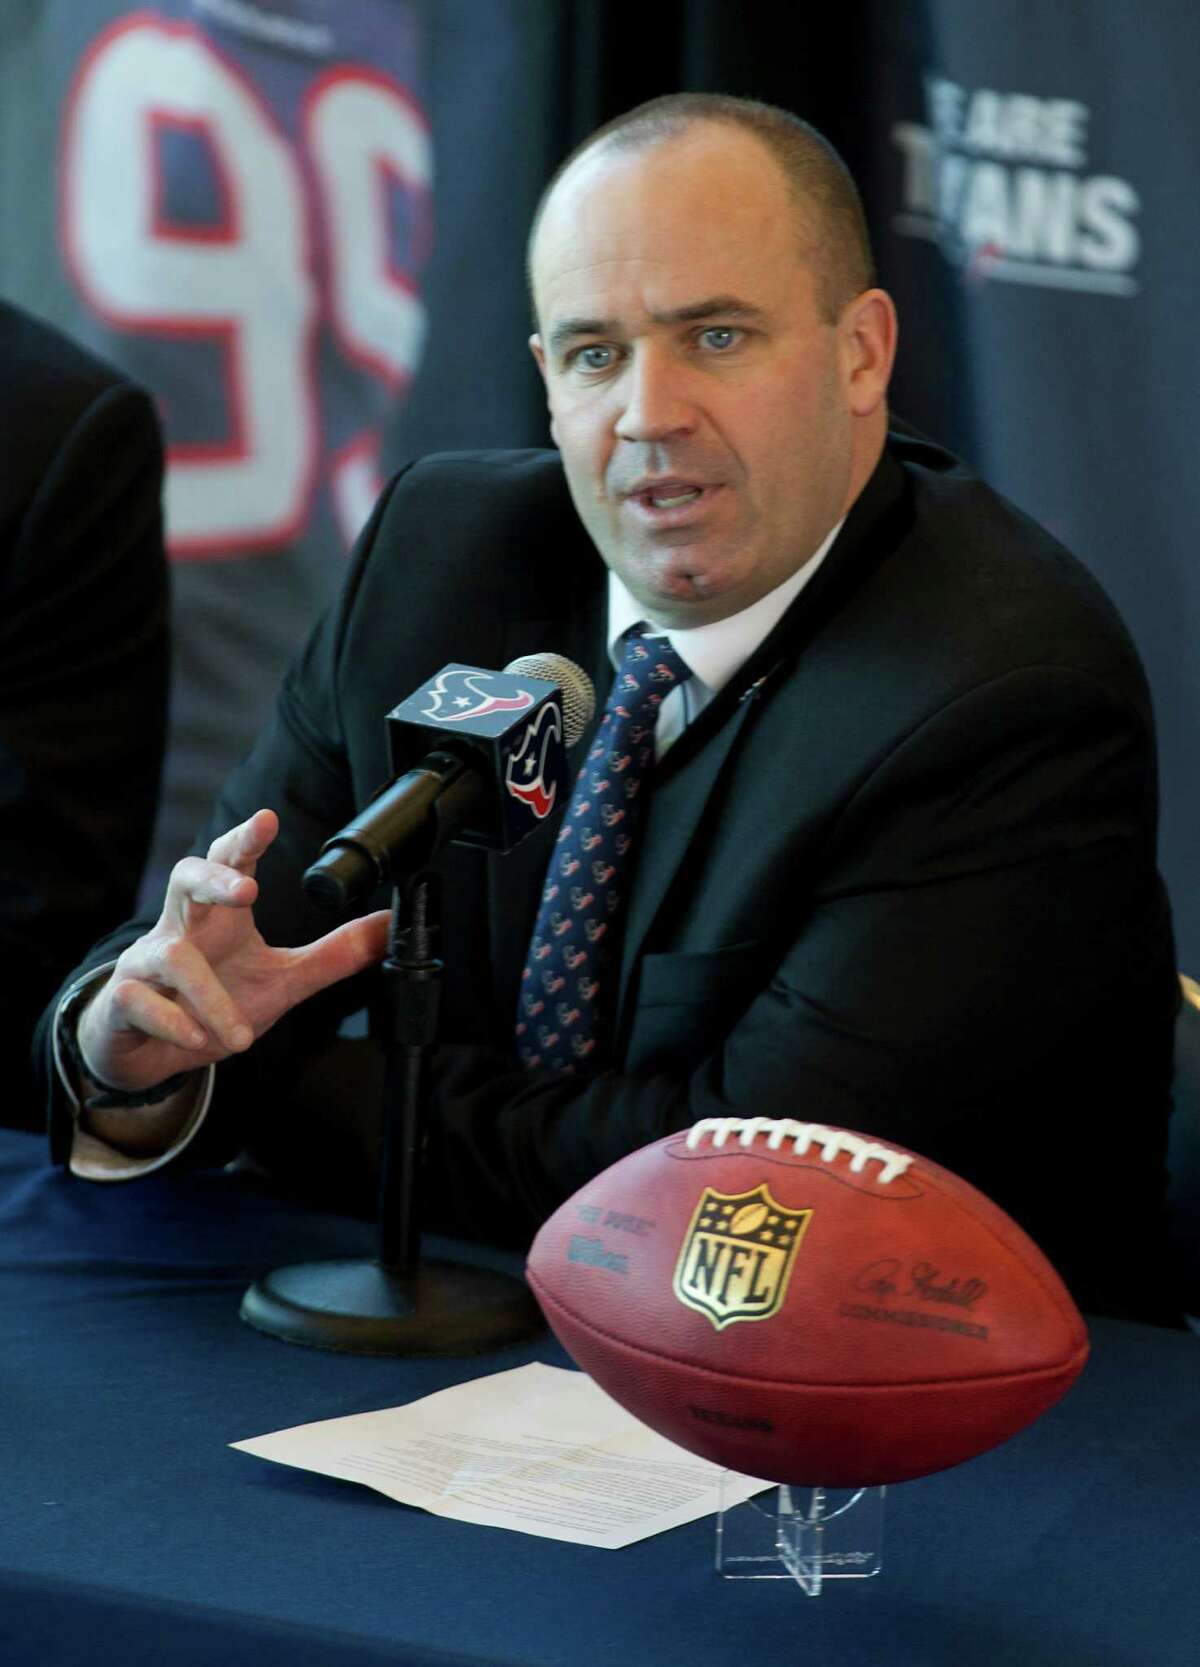 New head coach Bill O'Brien says he plans to call the plays in his first season with the Texans. O'Brien comes to the Texans, replacing Gary Kubiak, after two seasons as the head coach at Penn State. ( Brett Coomer / Houston Chronicle )